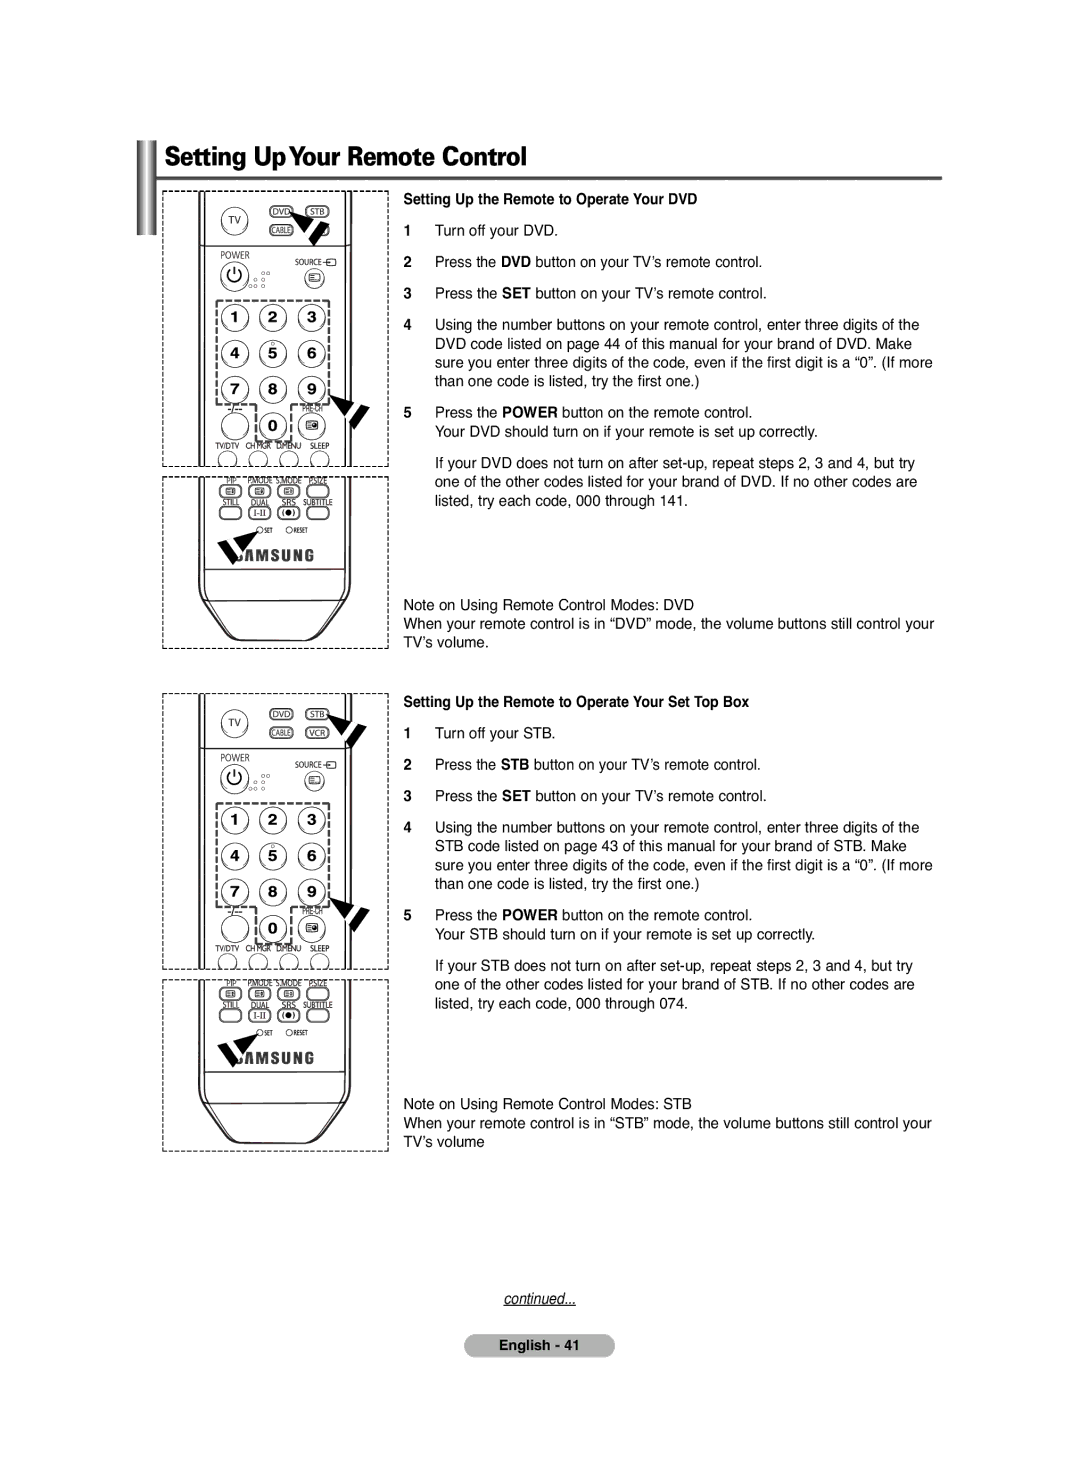 Samsung PS-42C6HD manual Setting UpYour Remote Control 